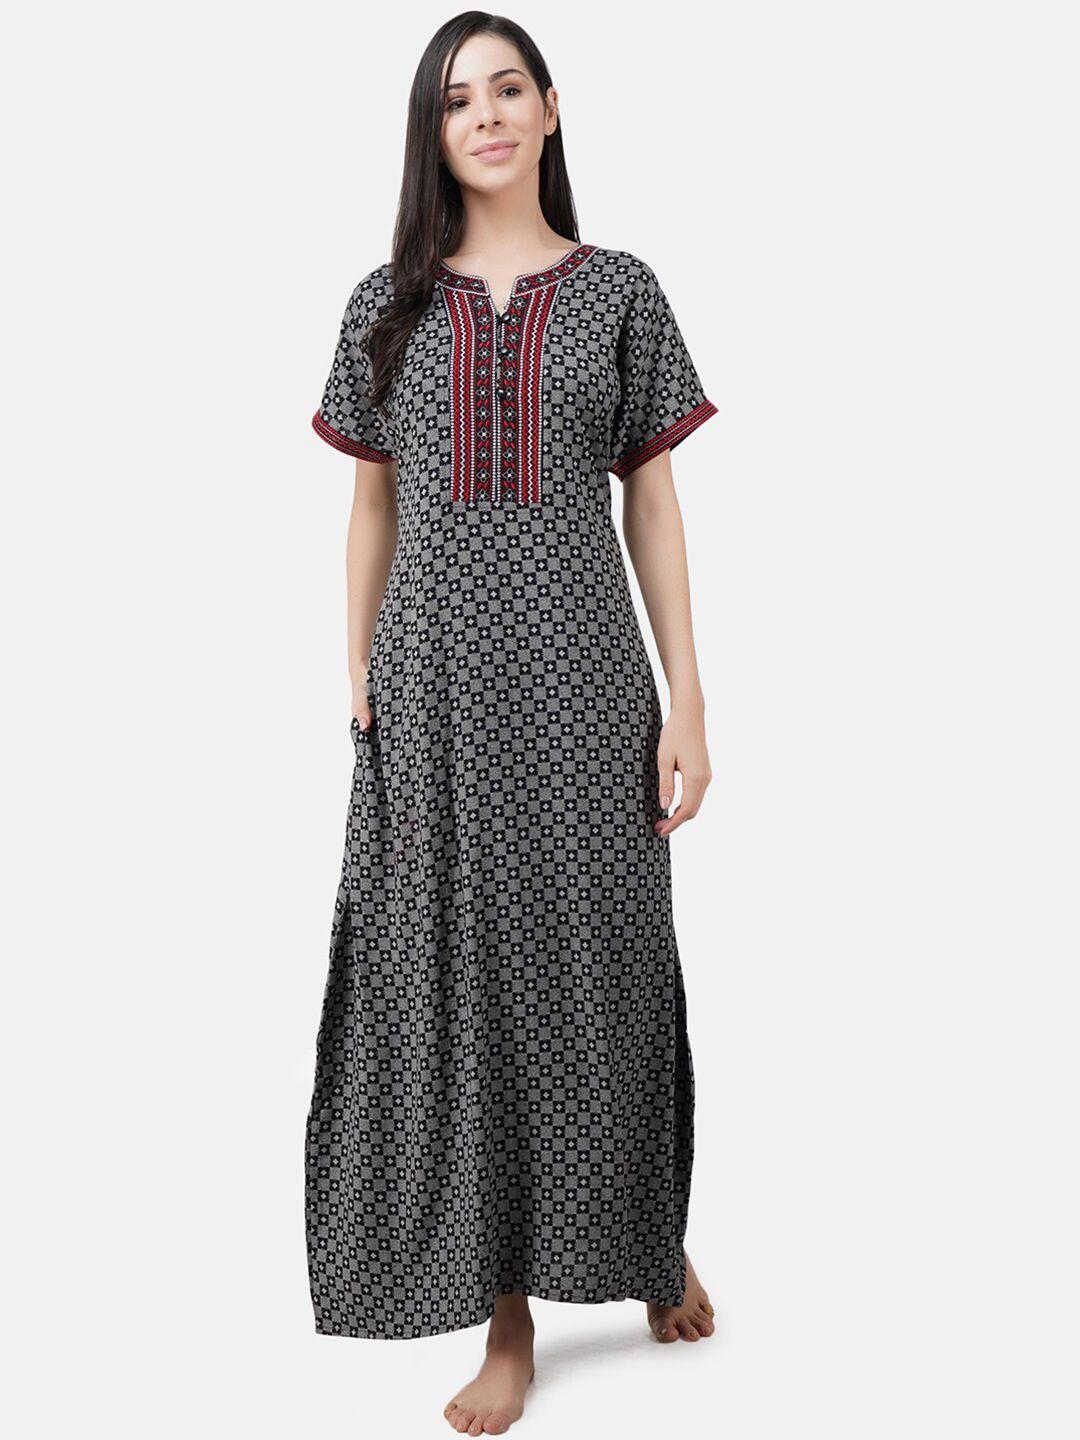 koi sleepwear grey printed maxi nightdress with embroidered detail & pockets